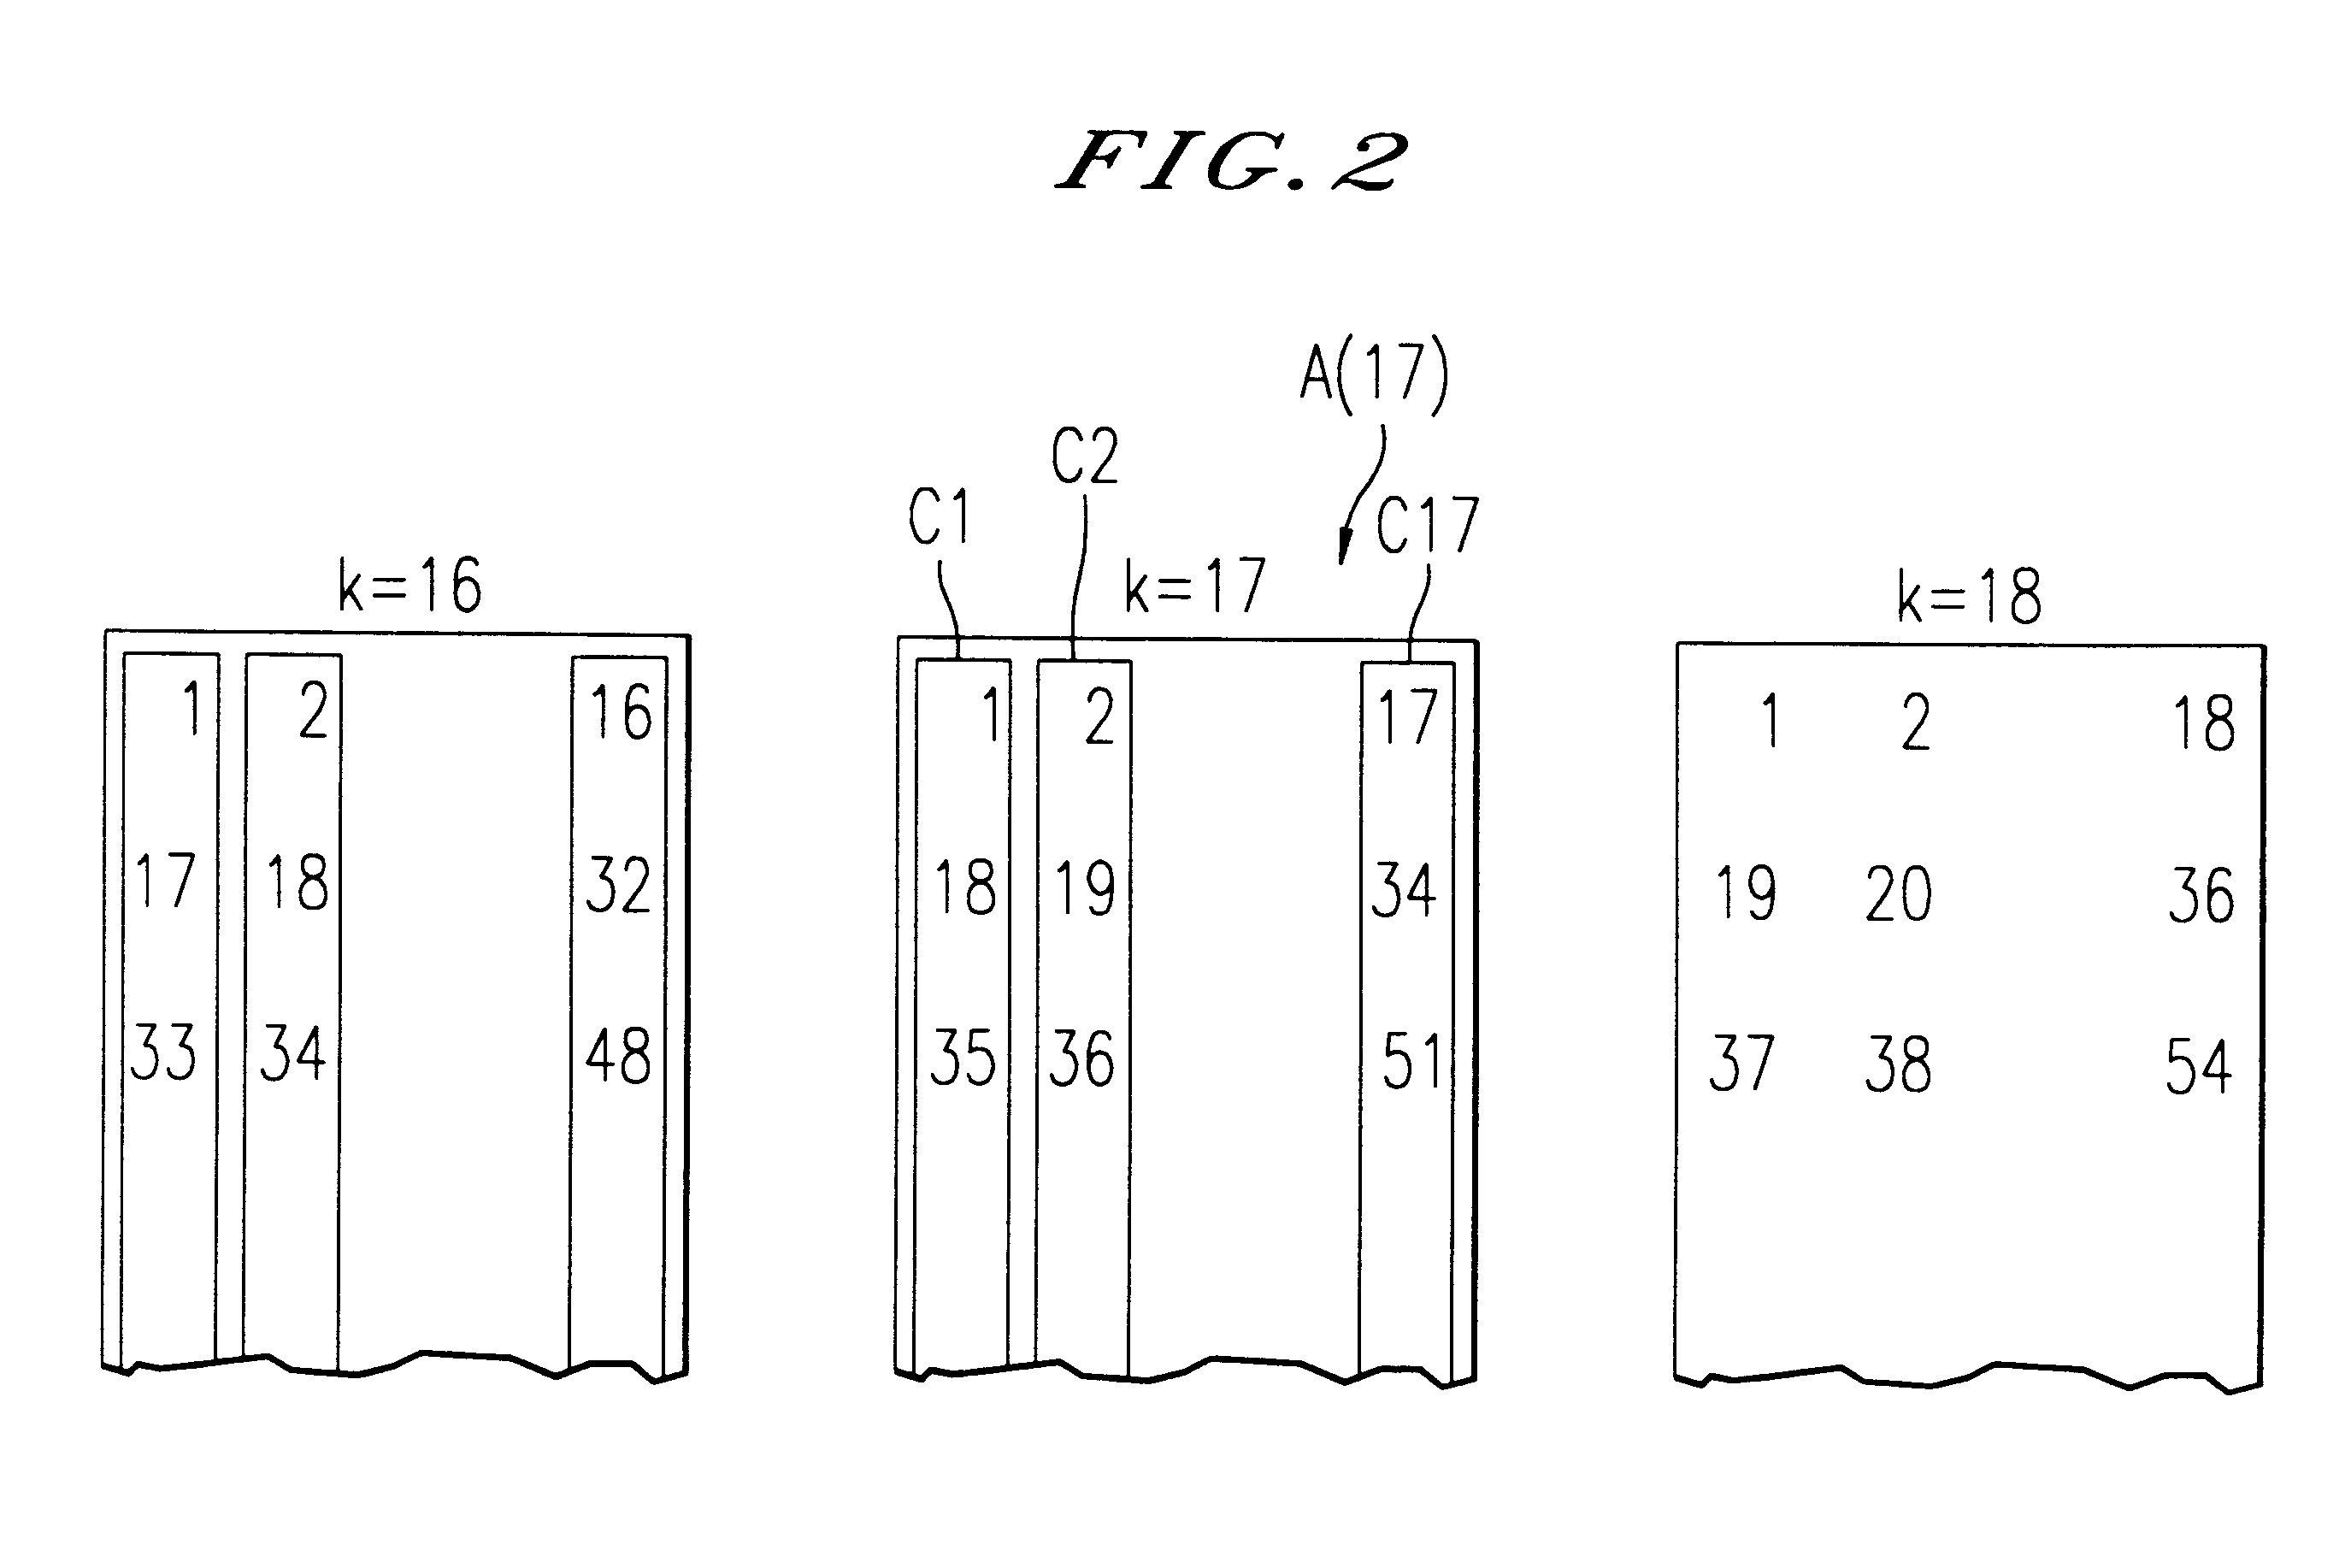 Method and apparatus for revealing latent characteristics existing in symbolic sequences